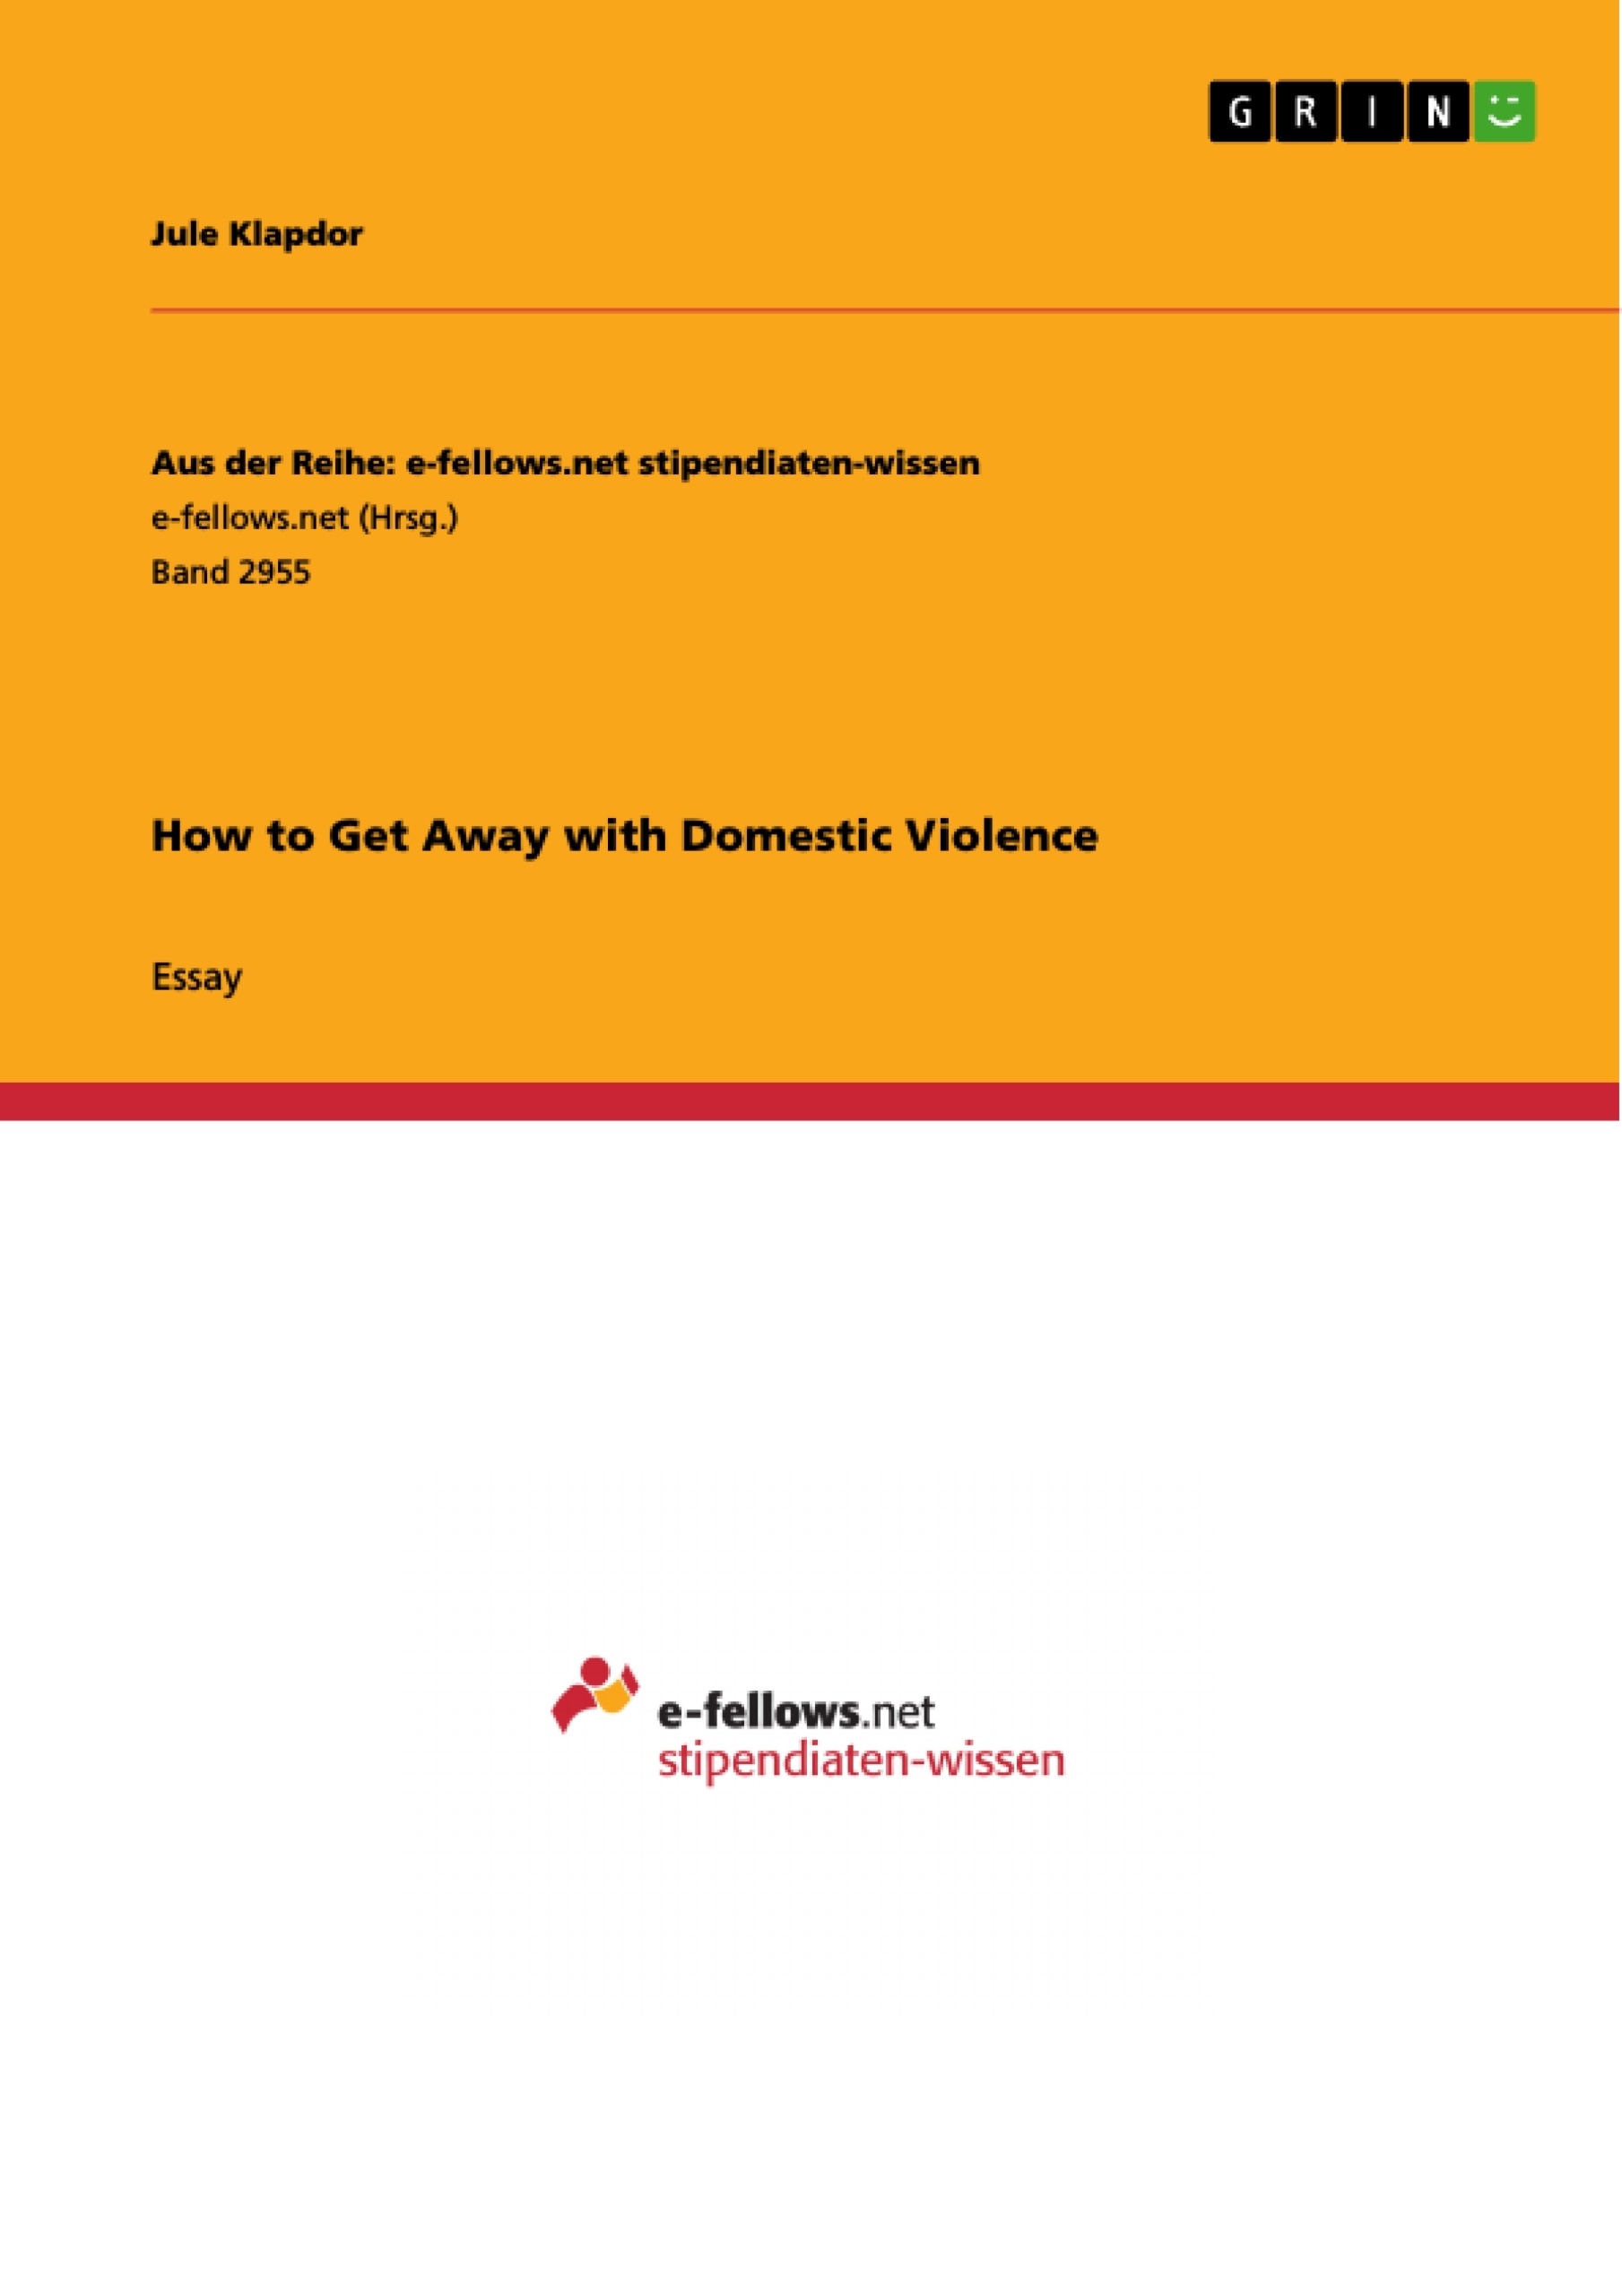 Title: How to Get Away with Domestic Violence